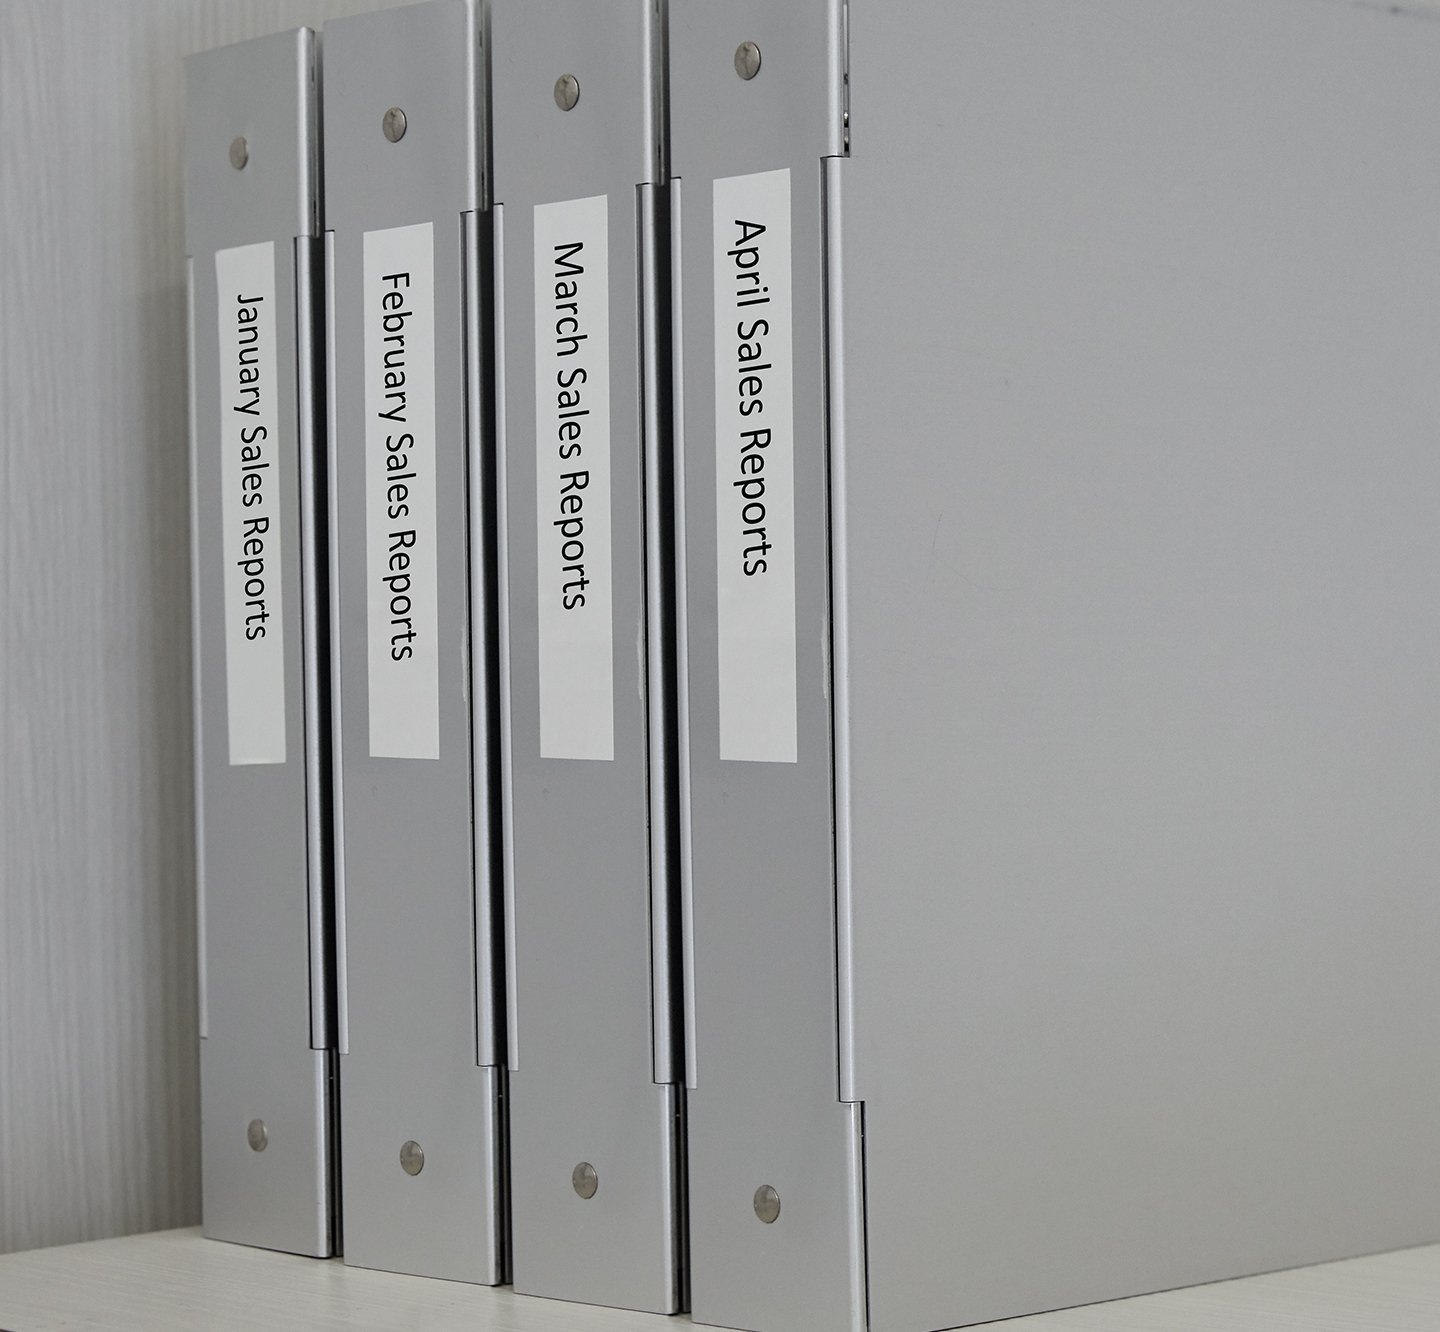 A row of labeled binders.